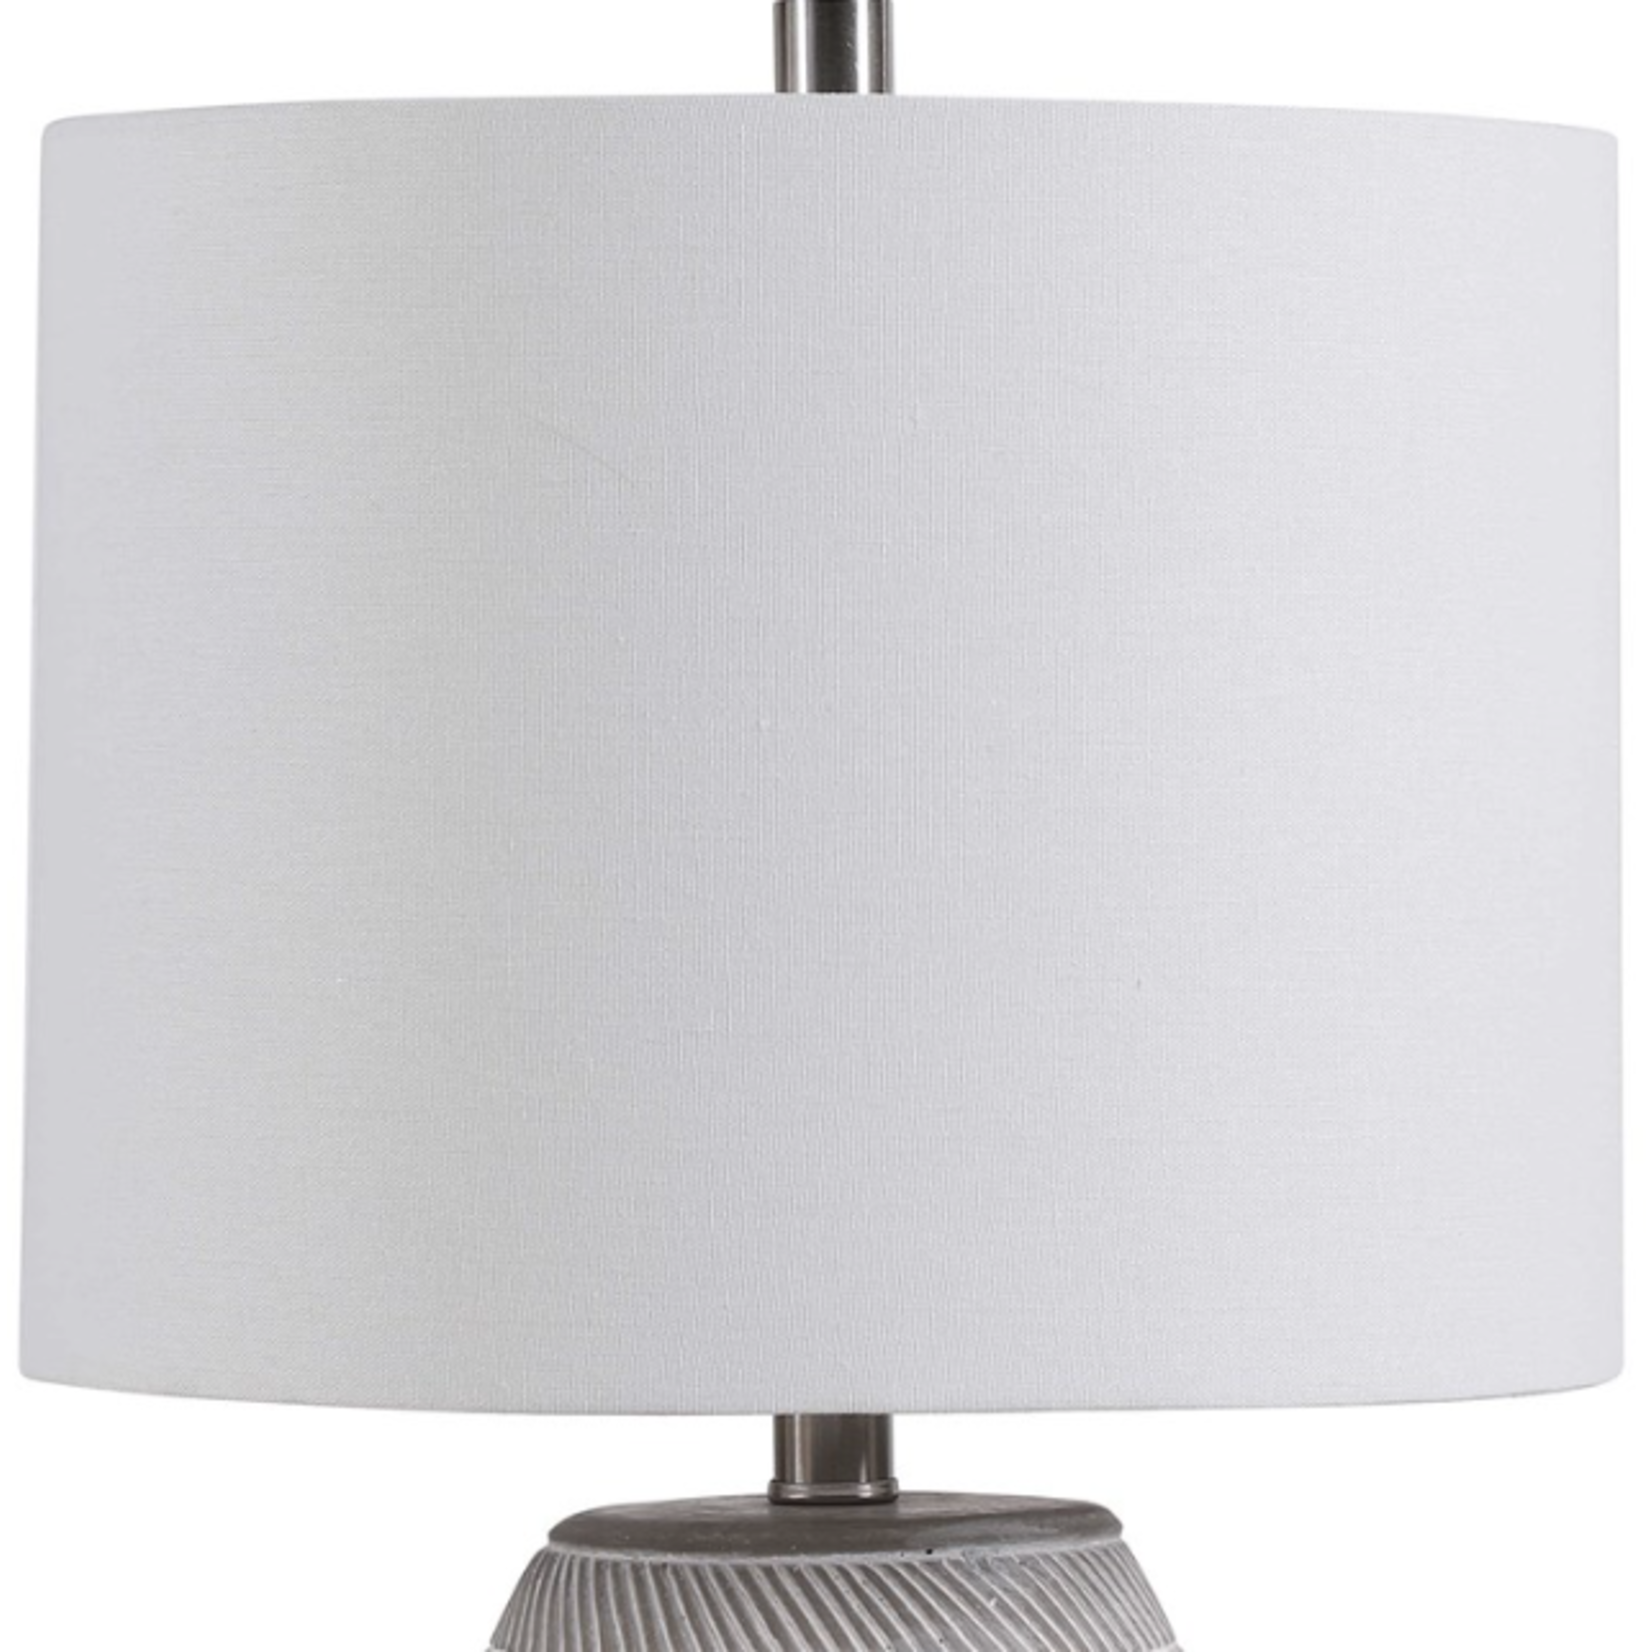 20" Uttermost Tan With White Etching Table Lamp